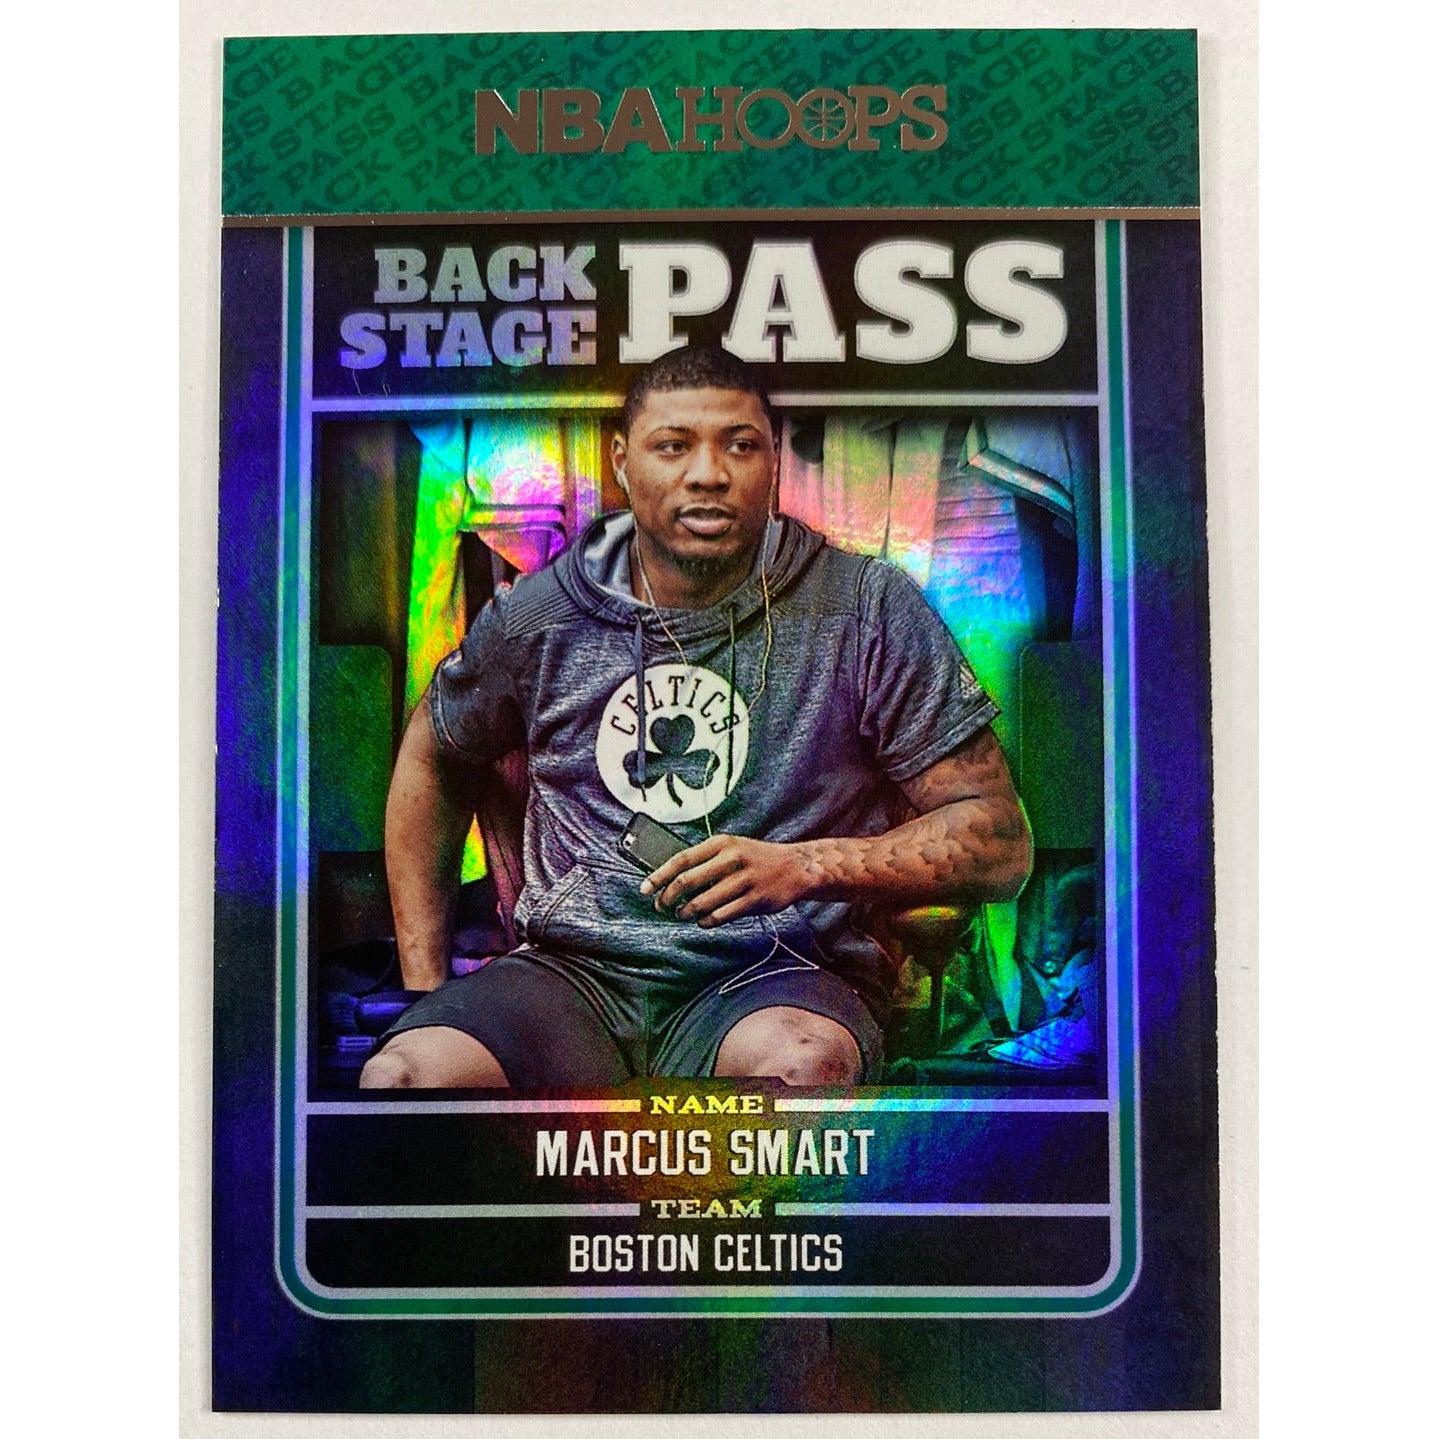 2017-18 Hoops Marcus Smart Back Stage Pass